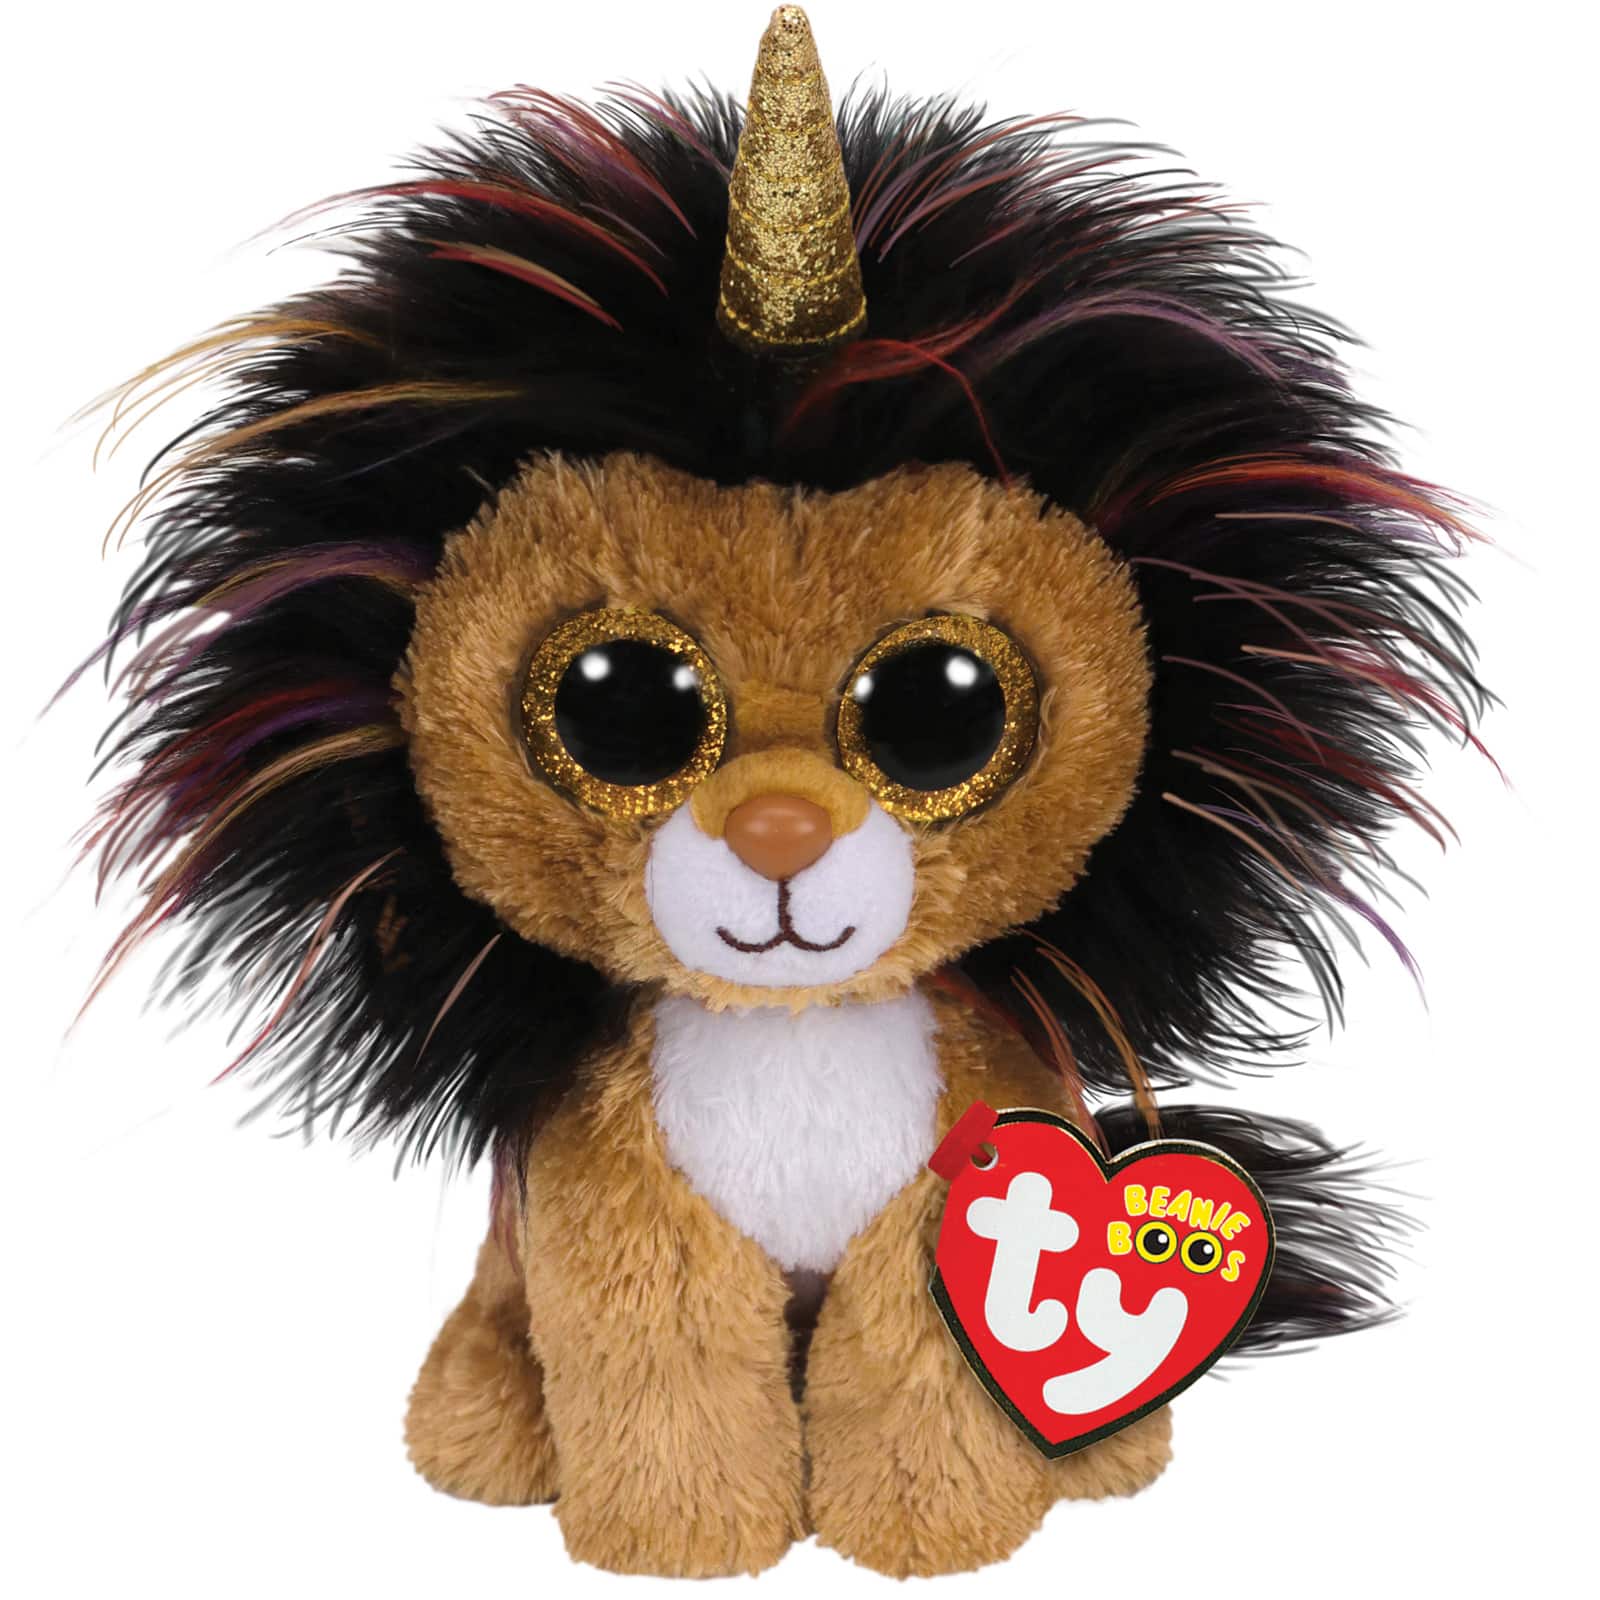 Shop for the Ty Beanie Boo's™ Ramsey Lion with Horn, Regular at